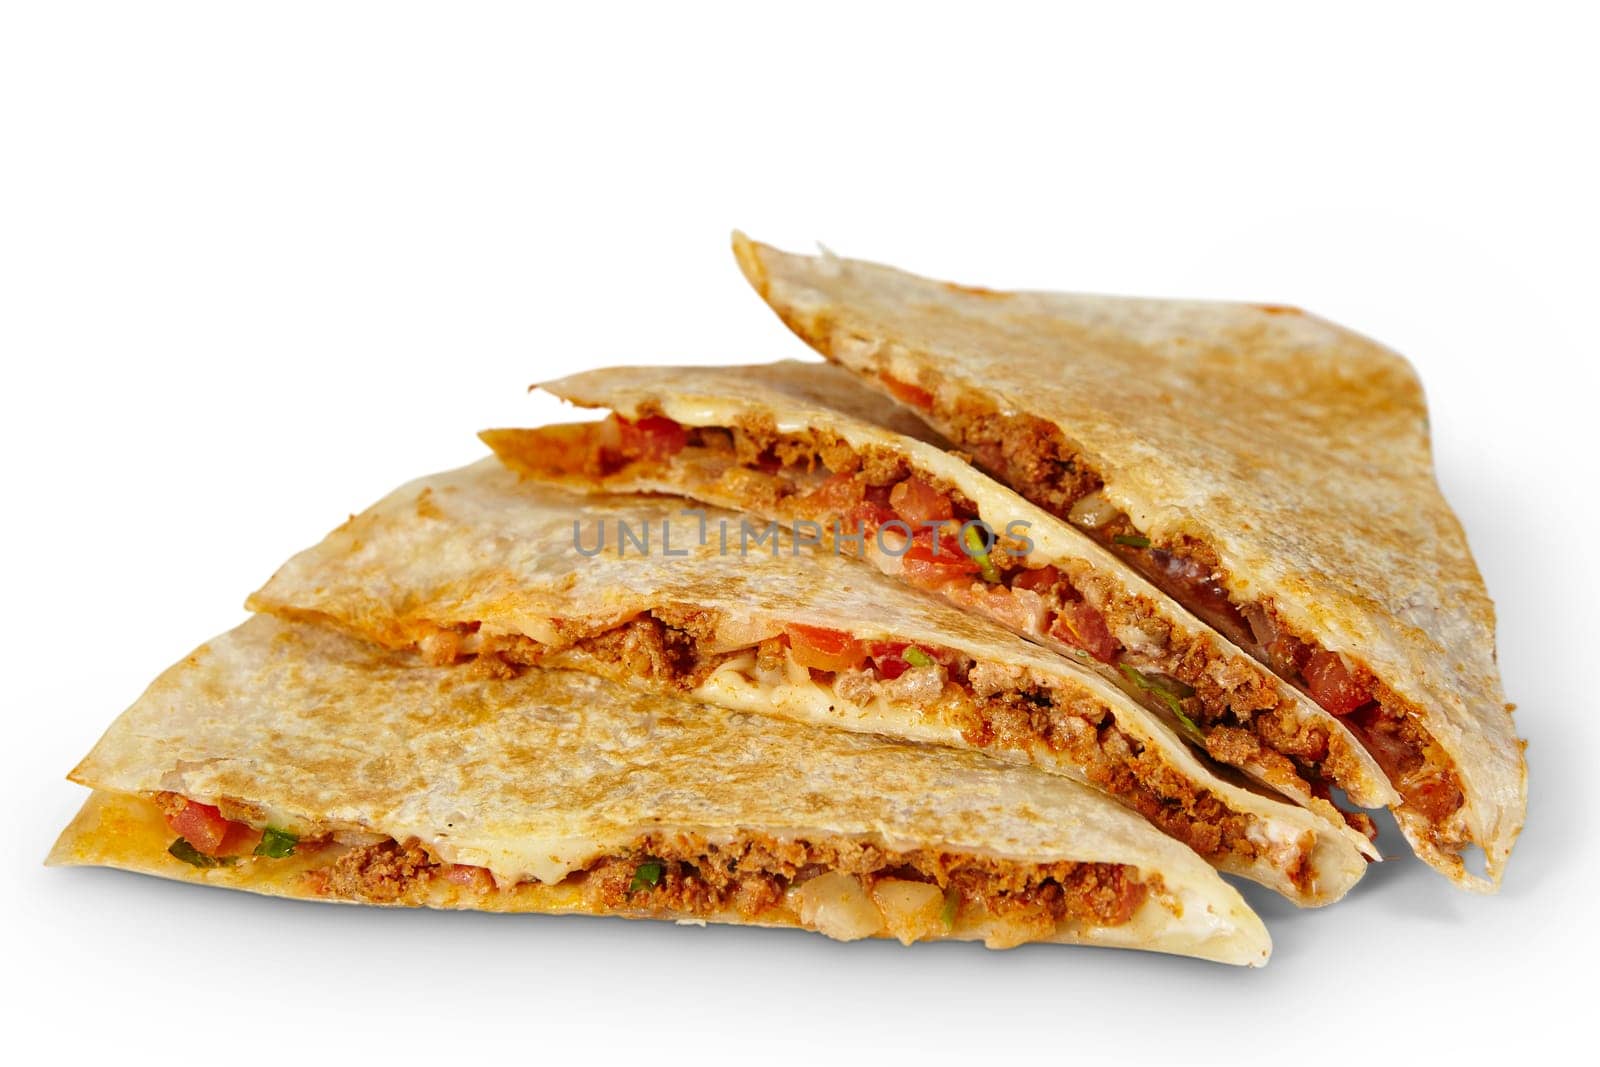 Grilled Quesadilla with Cheese and Meat Filling on White Close-Up by njproductions